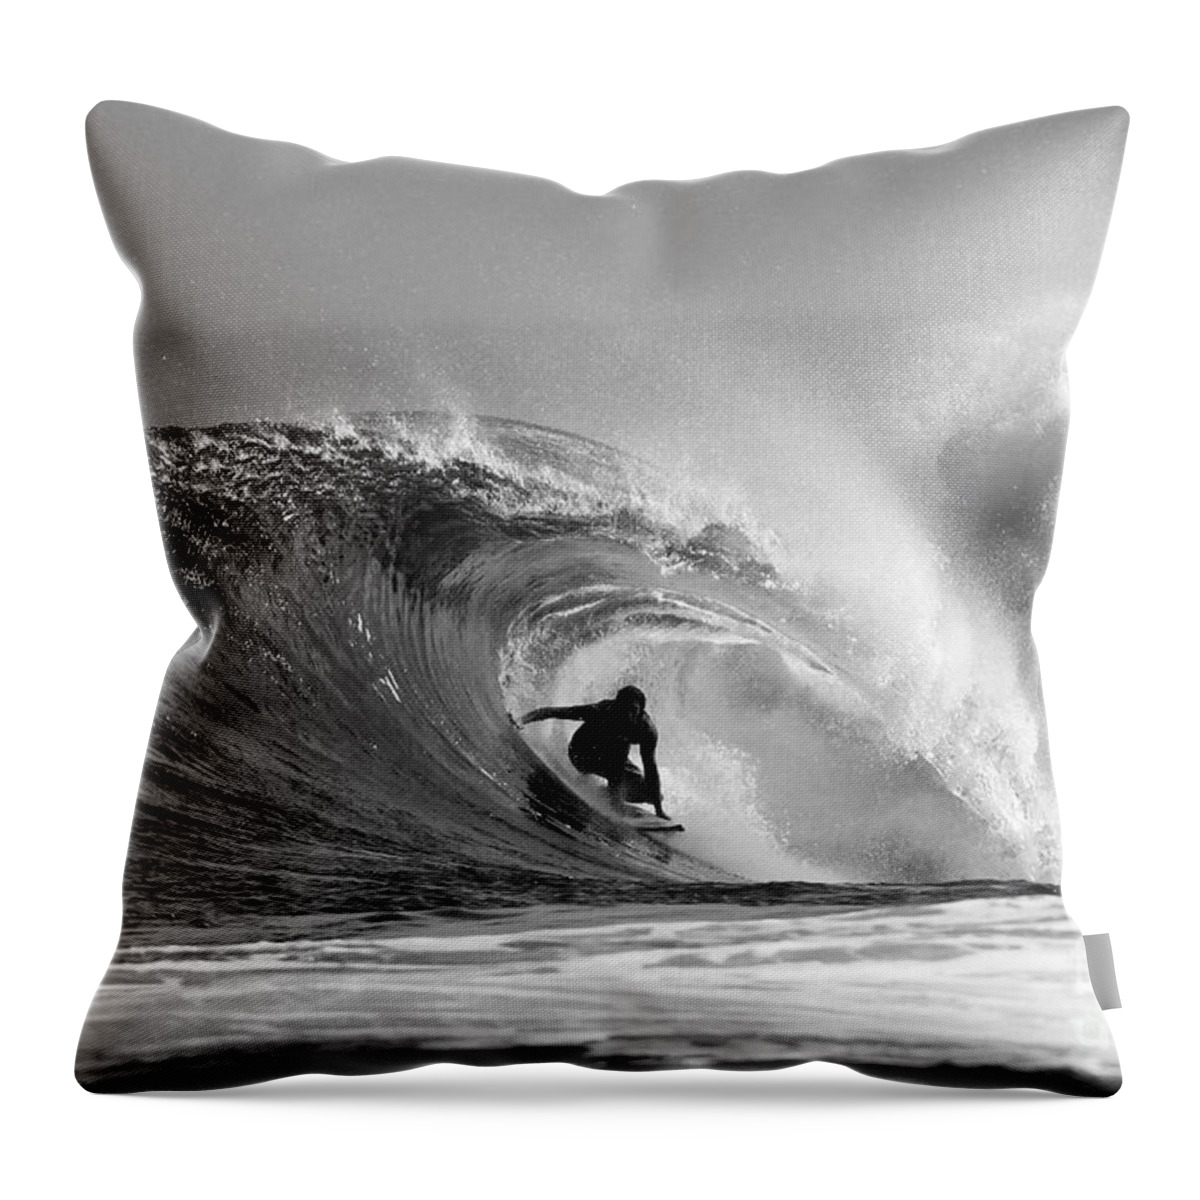 Surf Throw Pillow featuring the photograph Caveman by Paul Topp